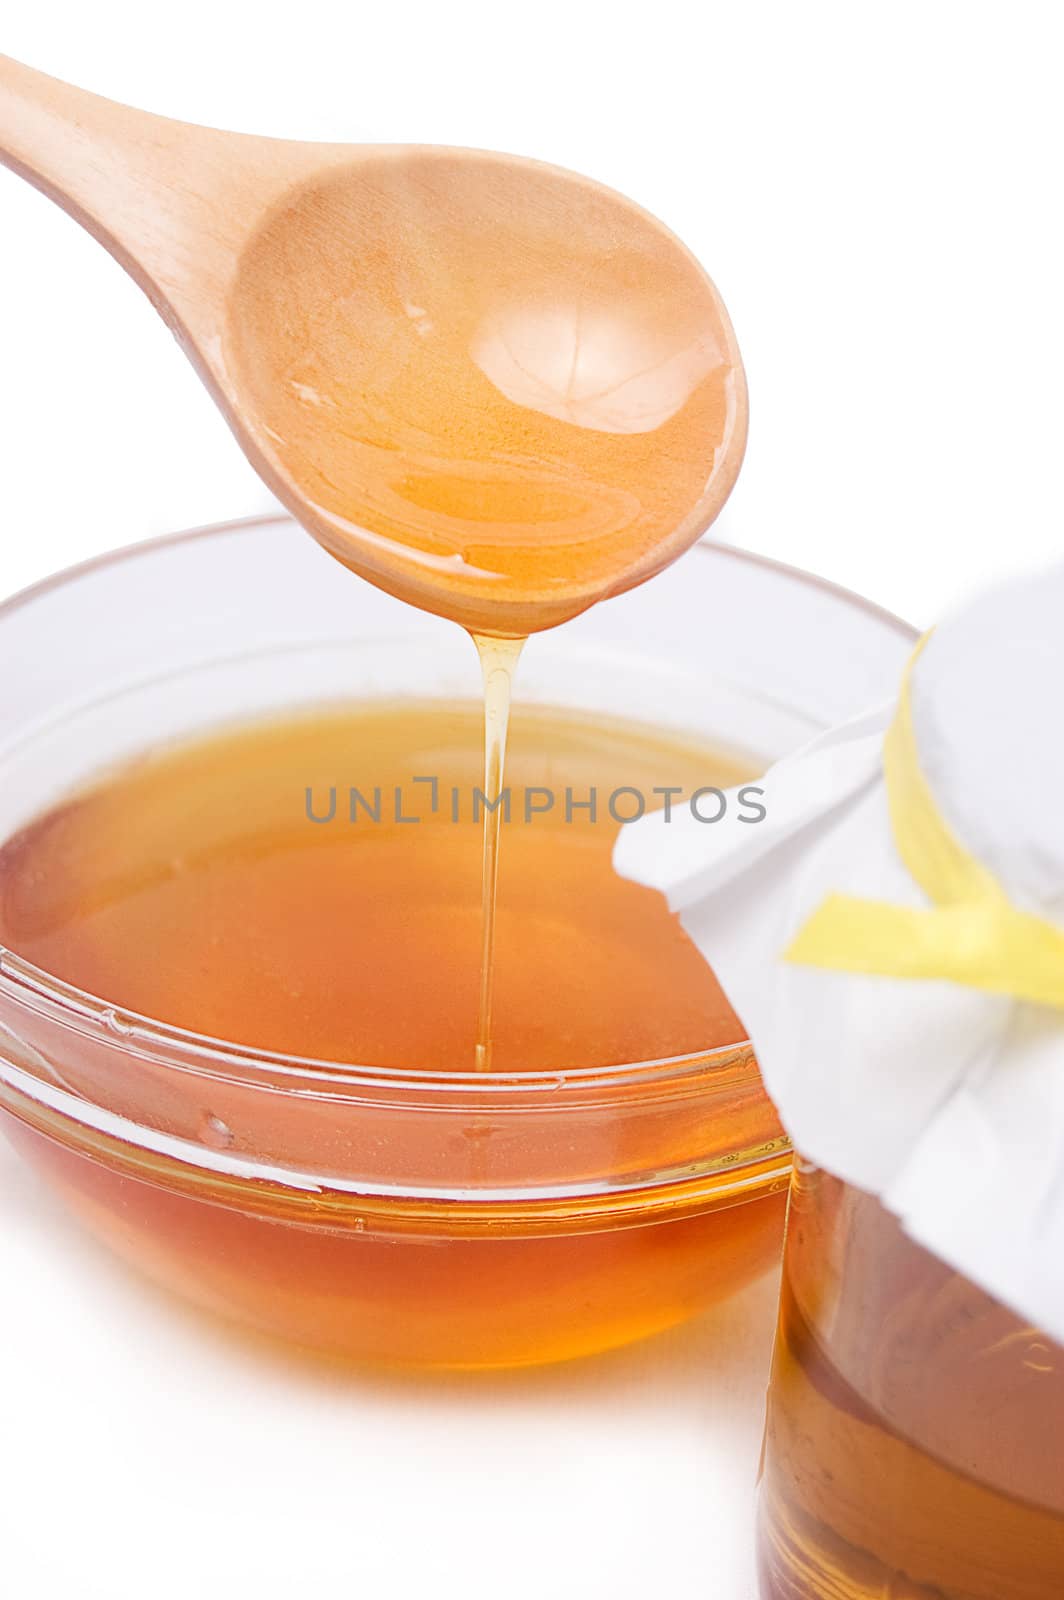 Honey running from wooden spoon in plate over white